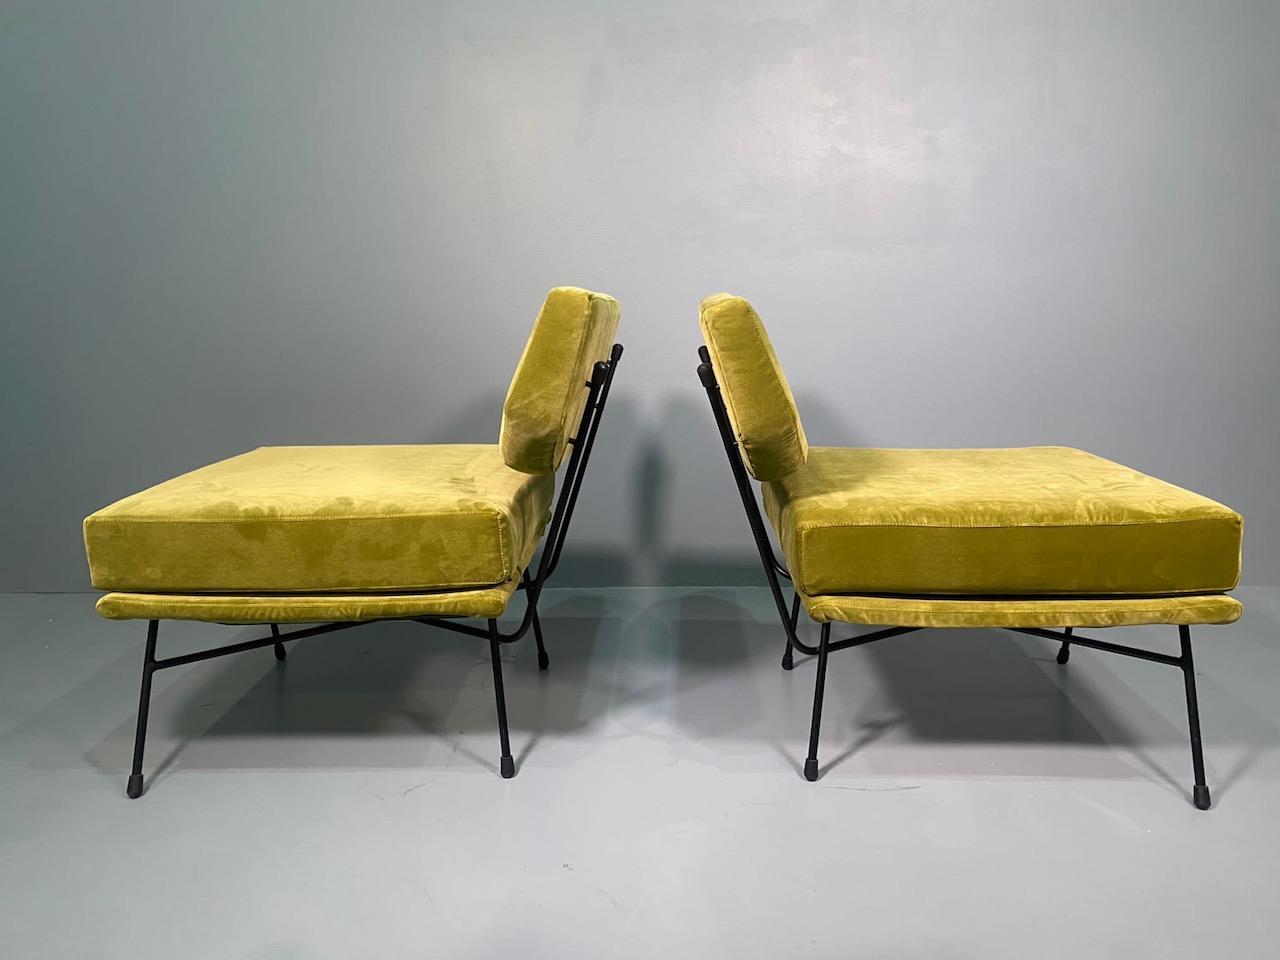 Pair of 'Elettra' Lounge Chairs by BBPR, Arflex, Italy 1953, Compasso D'Oro 1954 For Sale 11